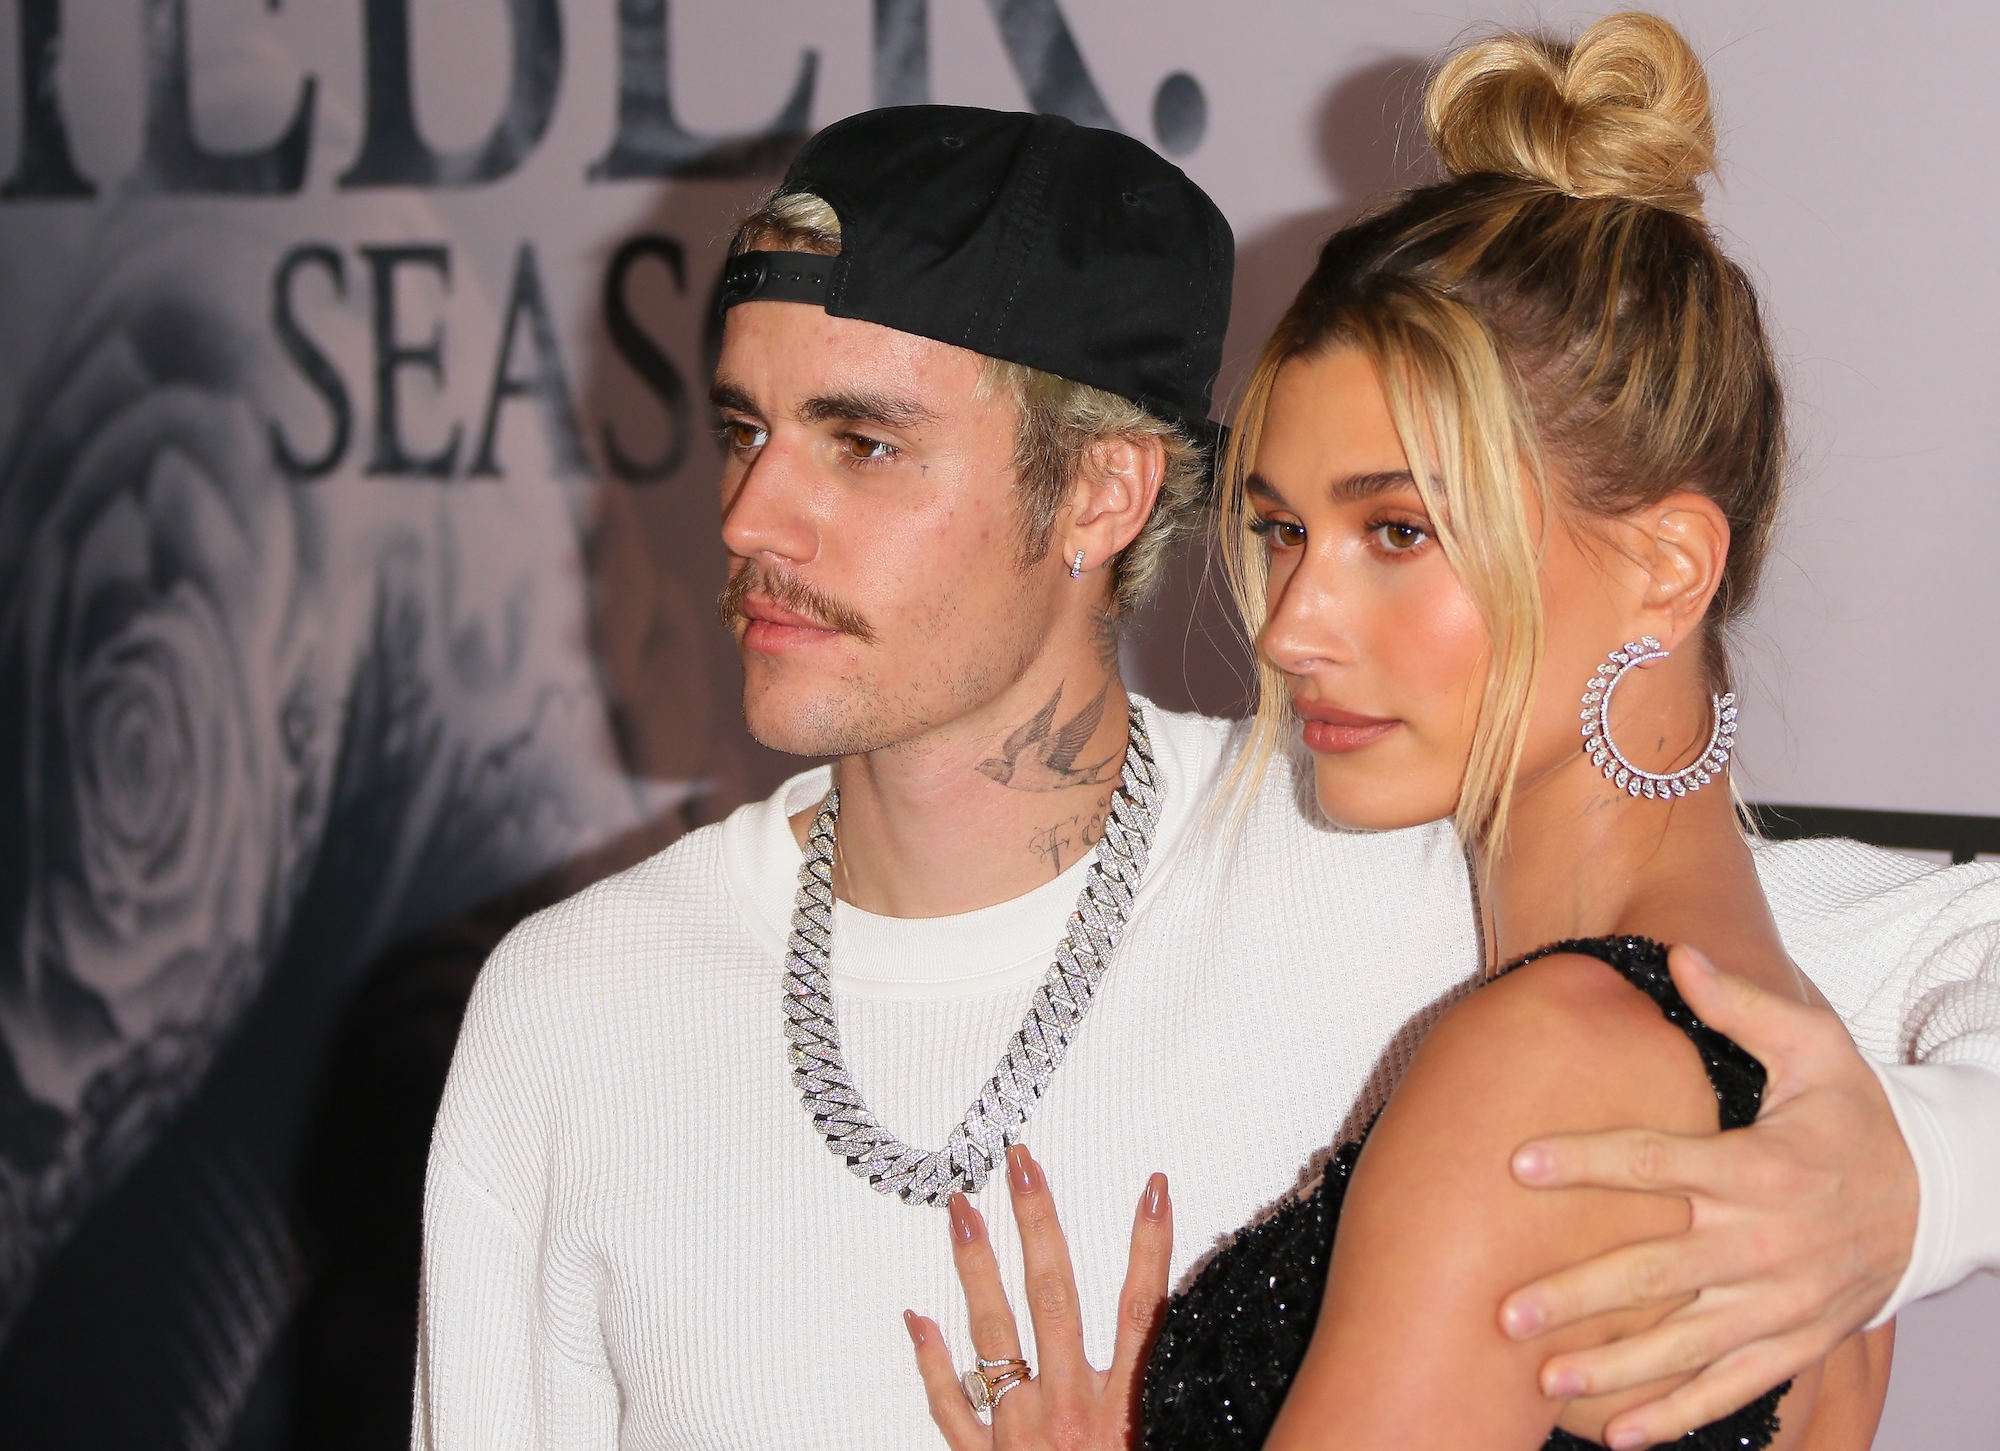 (L-R) Justin Bieber and Hailey Bieber embraced, facing the camera